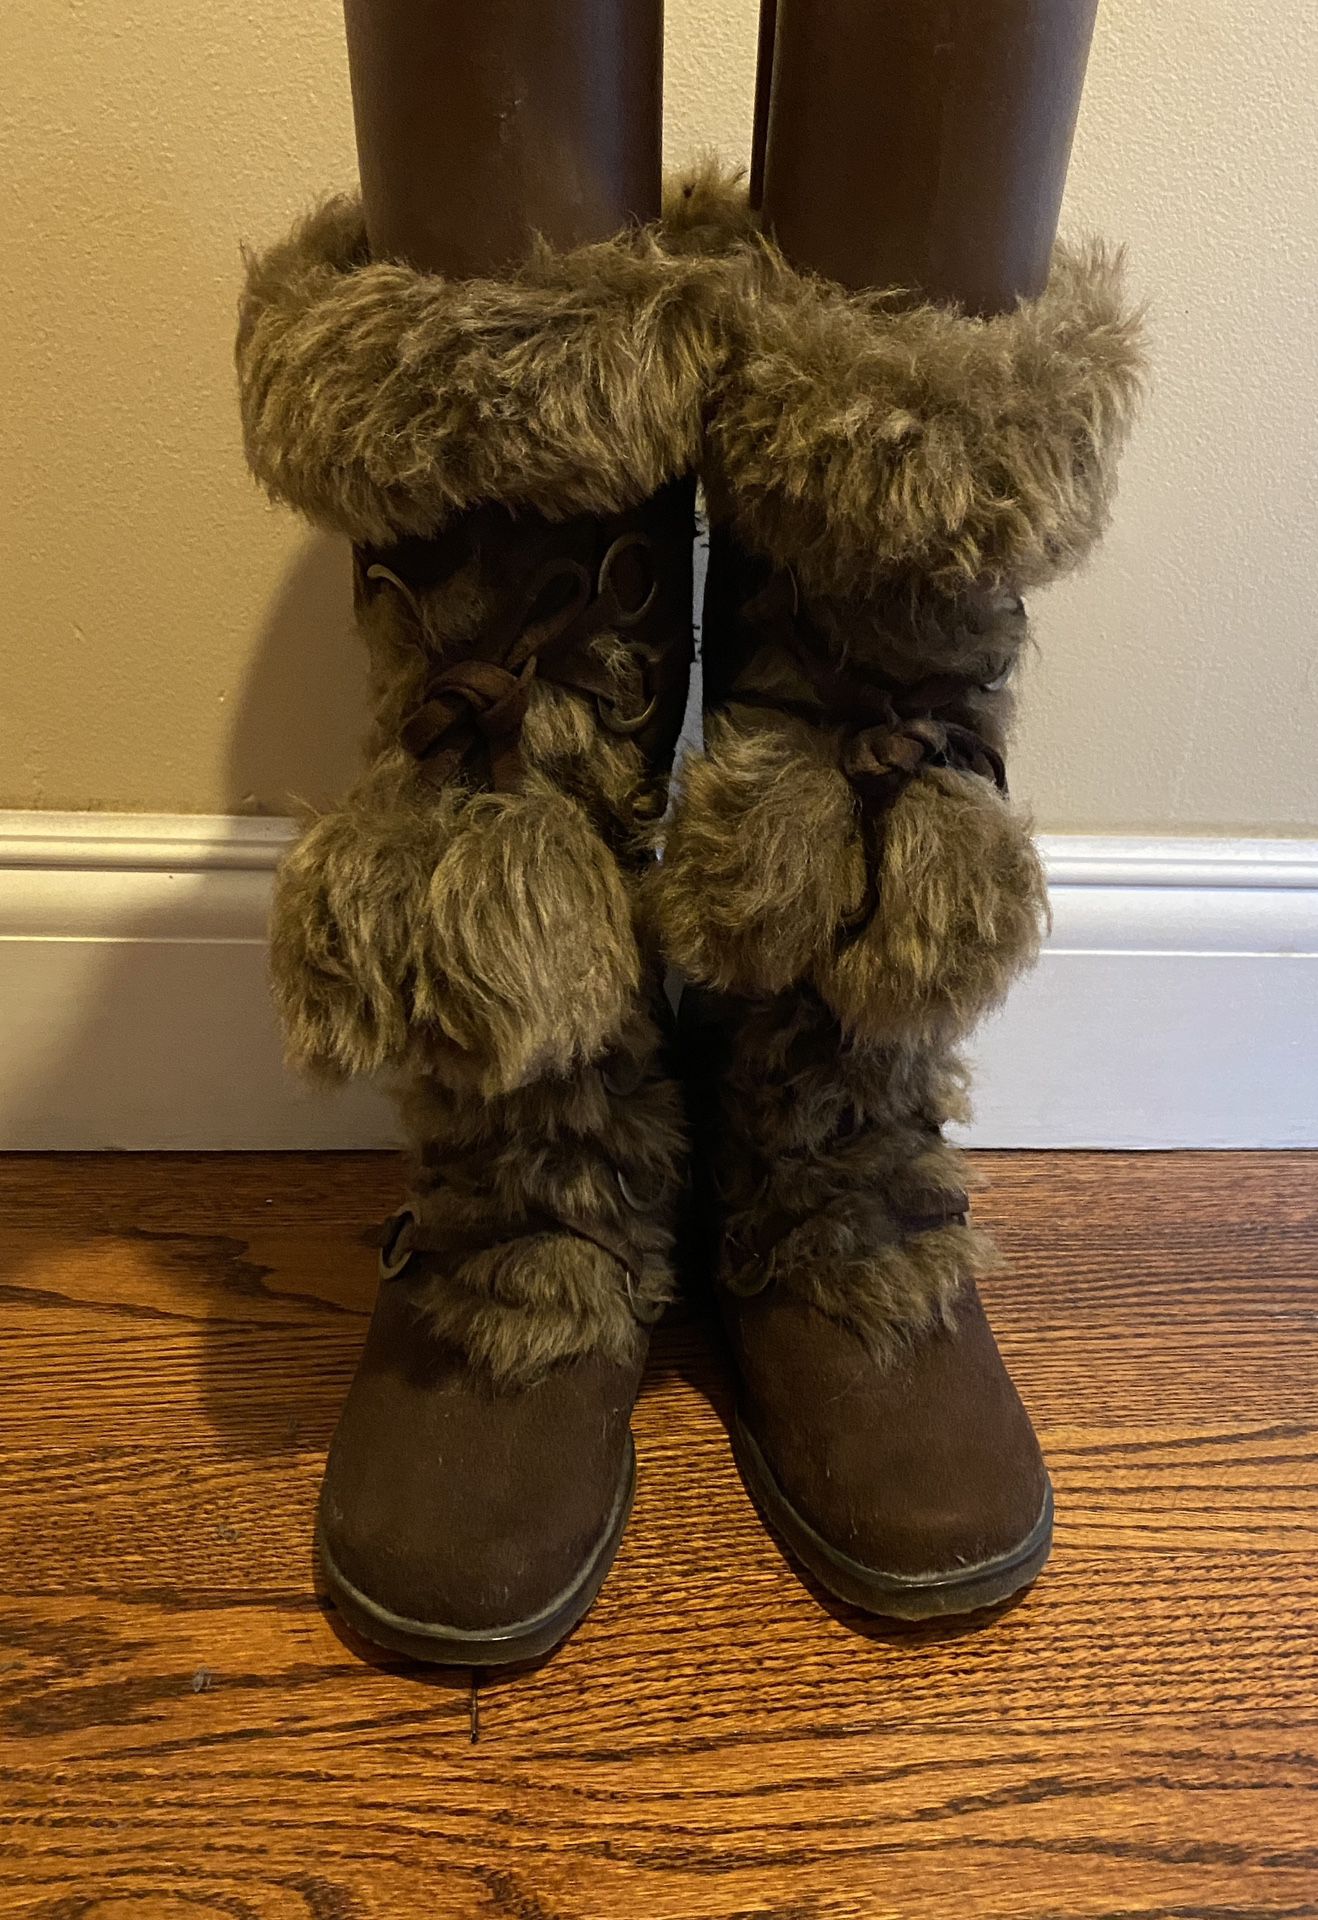 Vintage Boots With Fur 